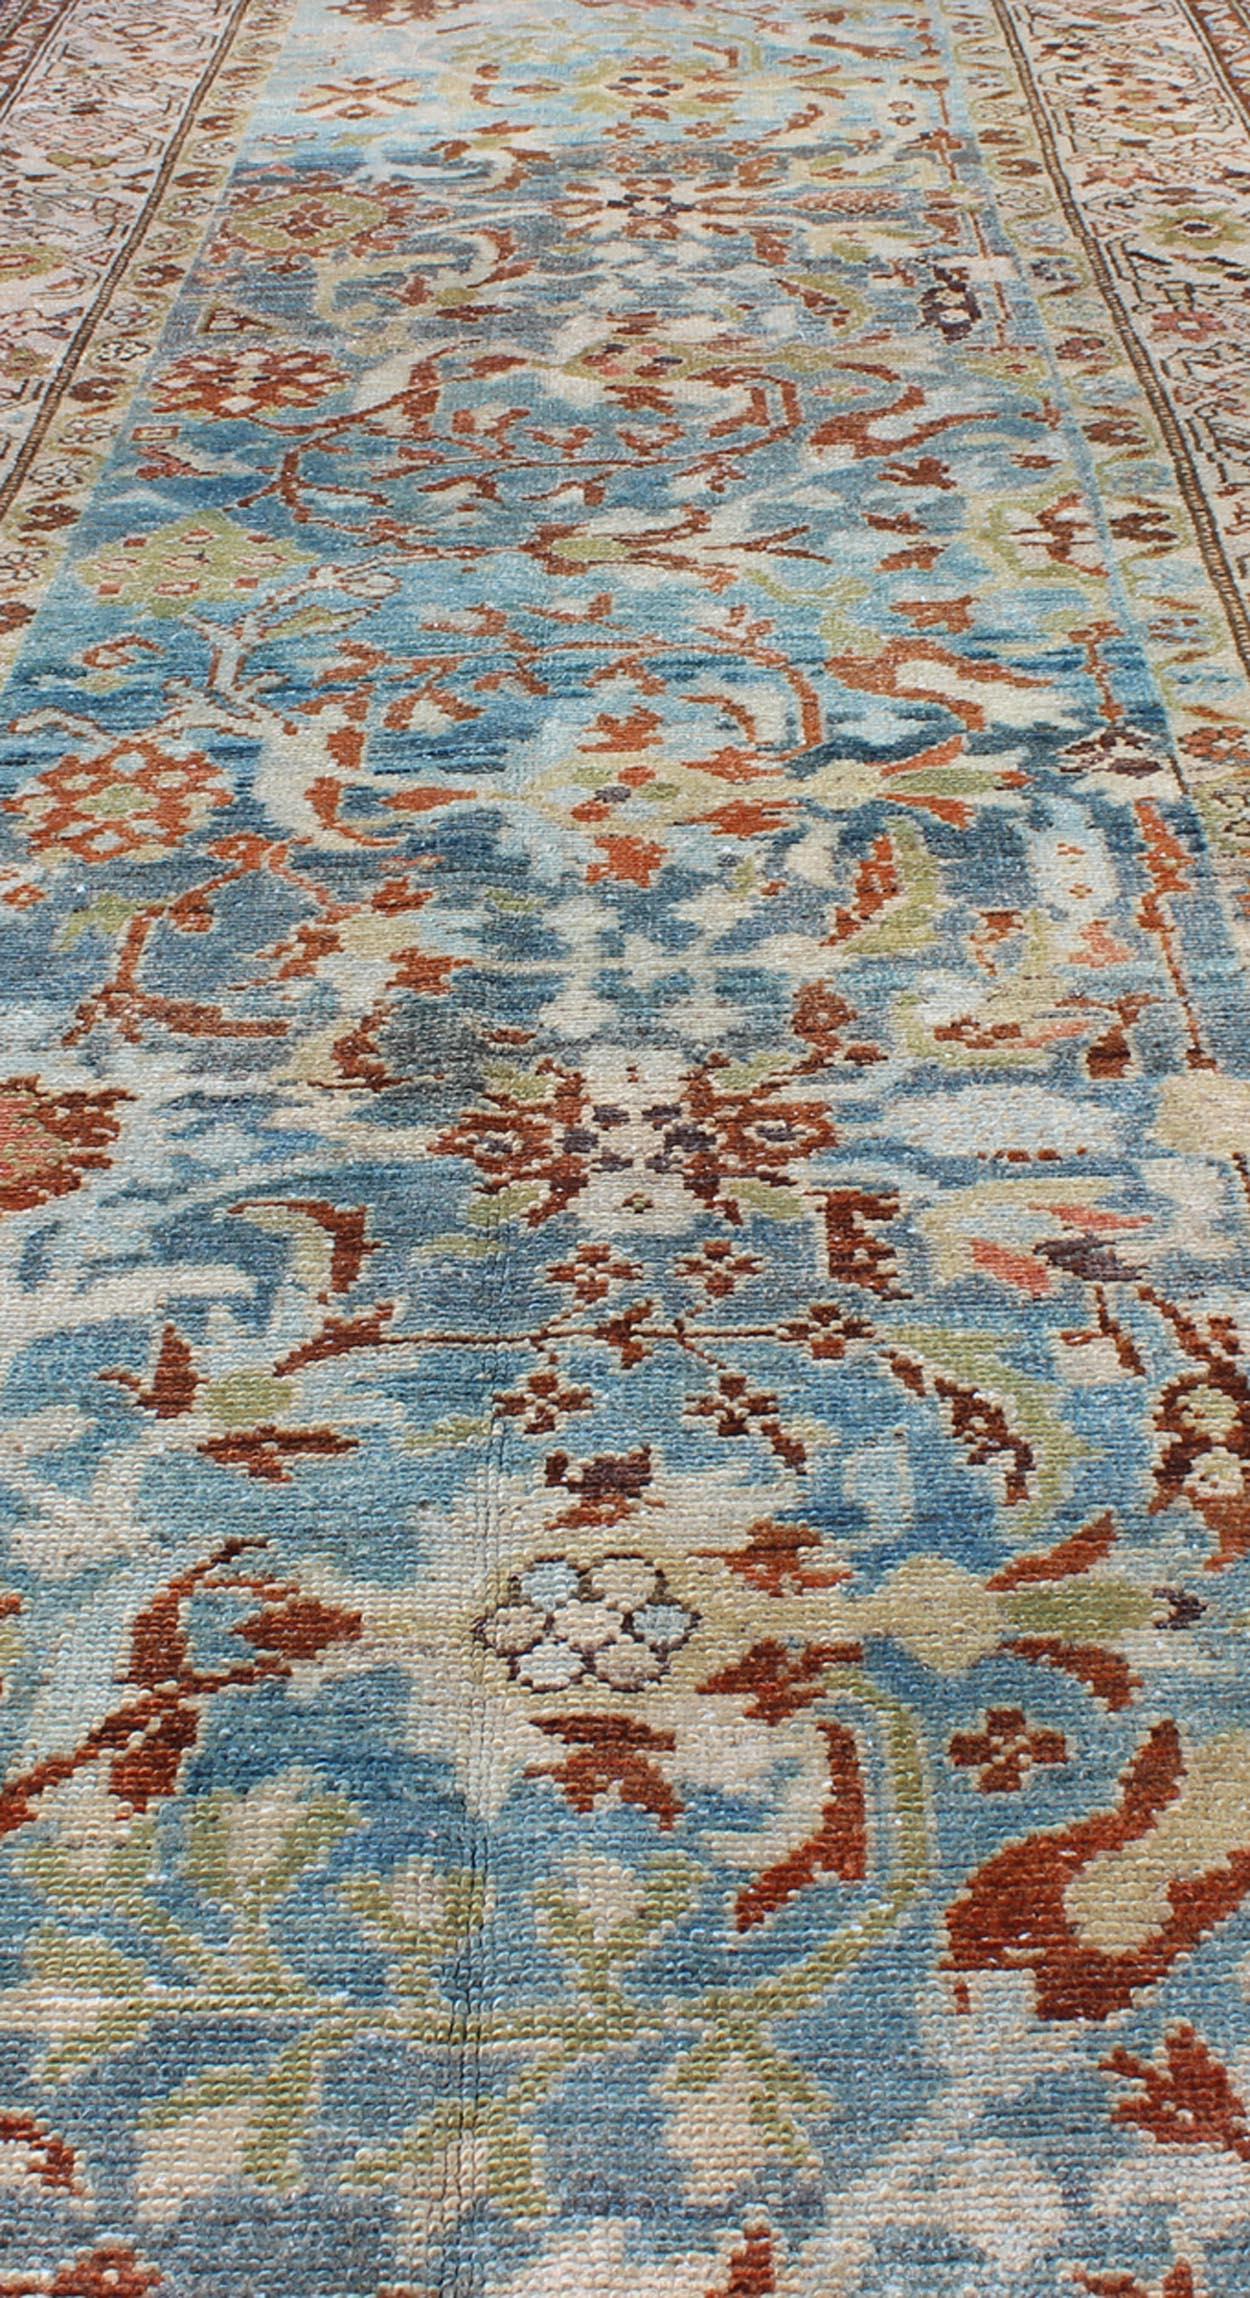 Wool Intricate Floral Design Antique Persian Malayer Runner in Blue, Ivory, Peach For Sale